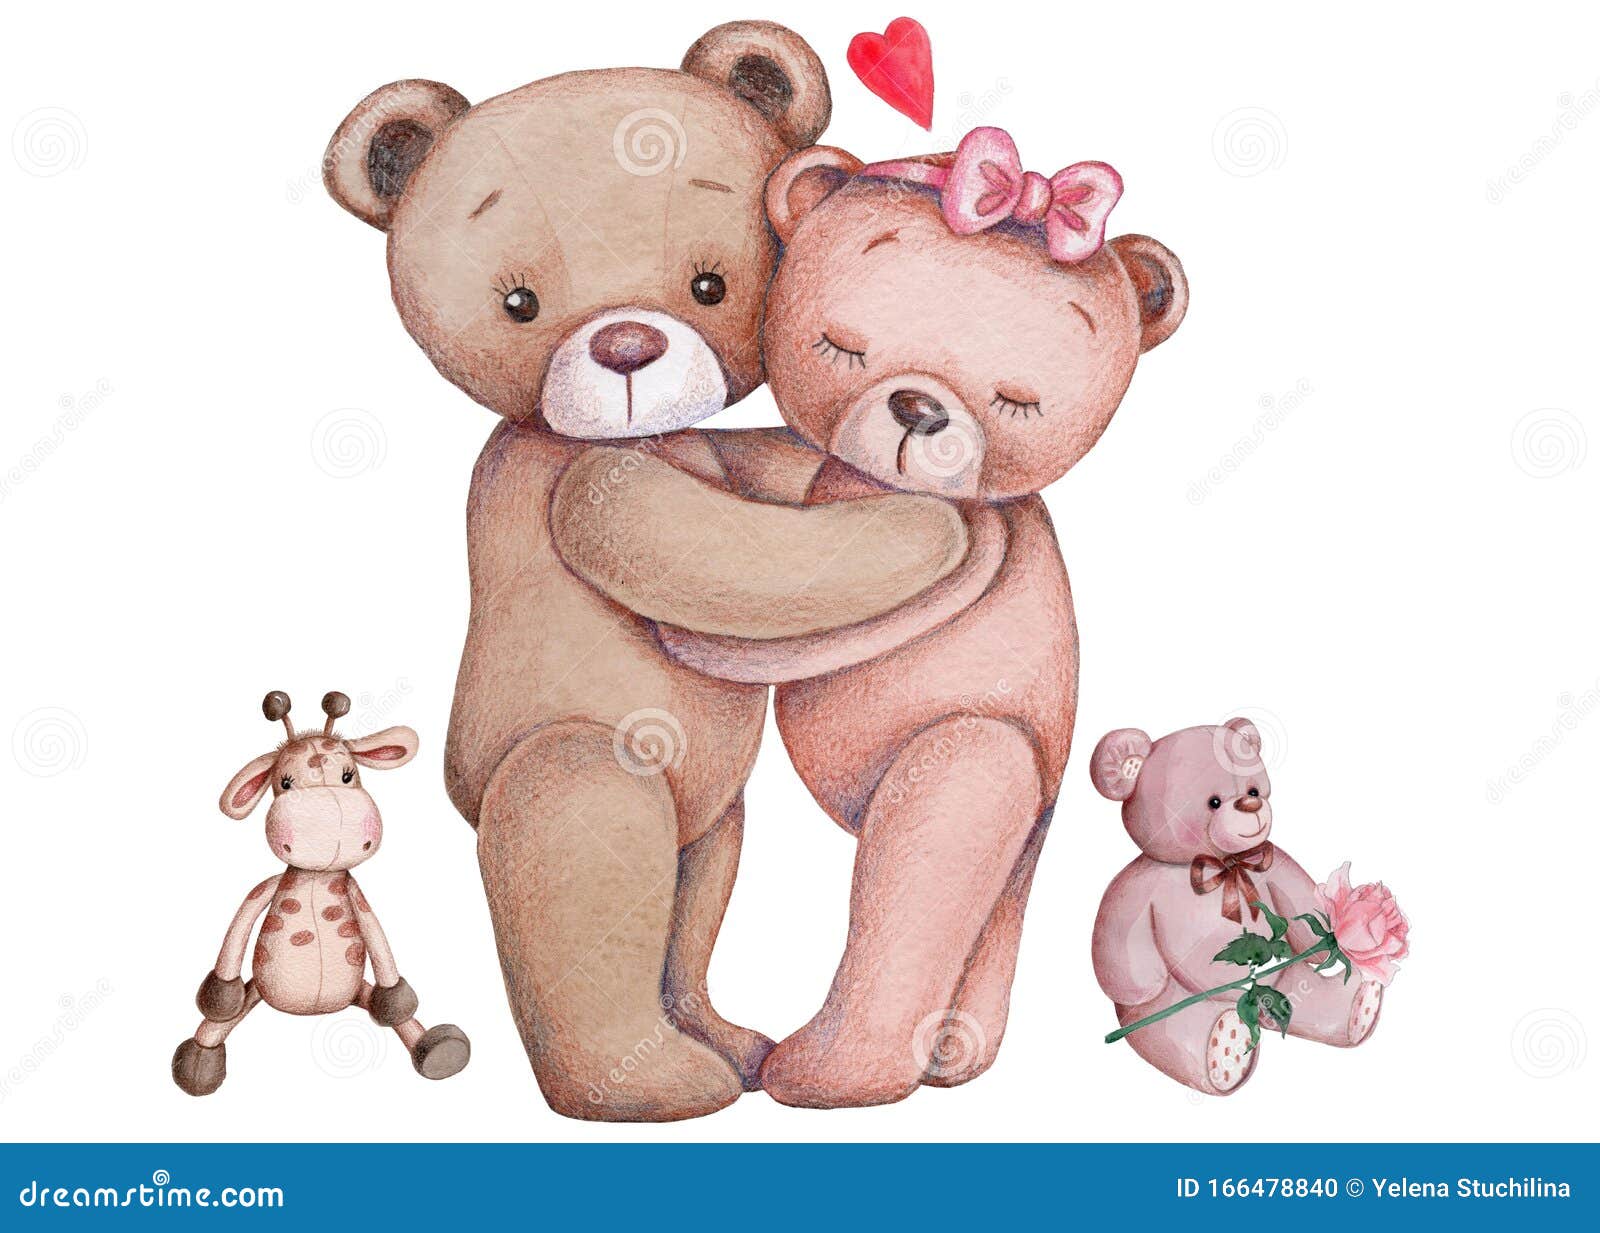 Watercolor Illustration of 2 Cute Toy Teddy Bears Stock Illustration -  Illustration of bear, lovely: 166478840